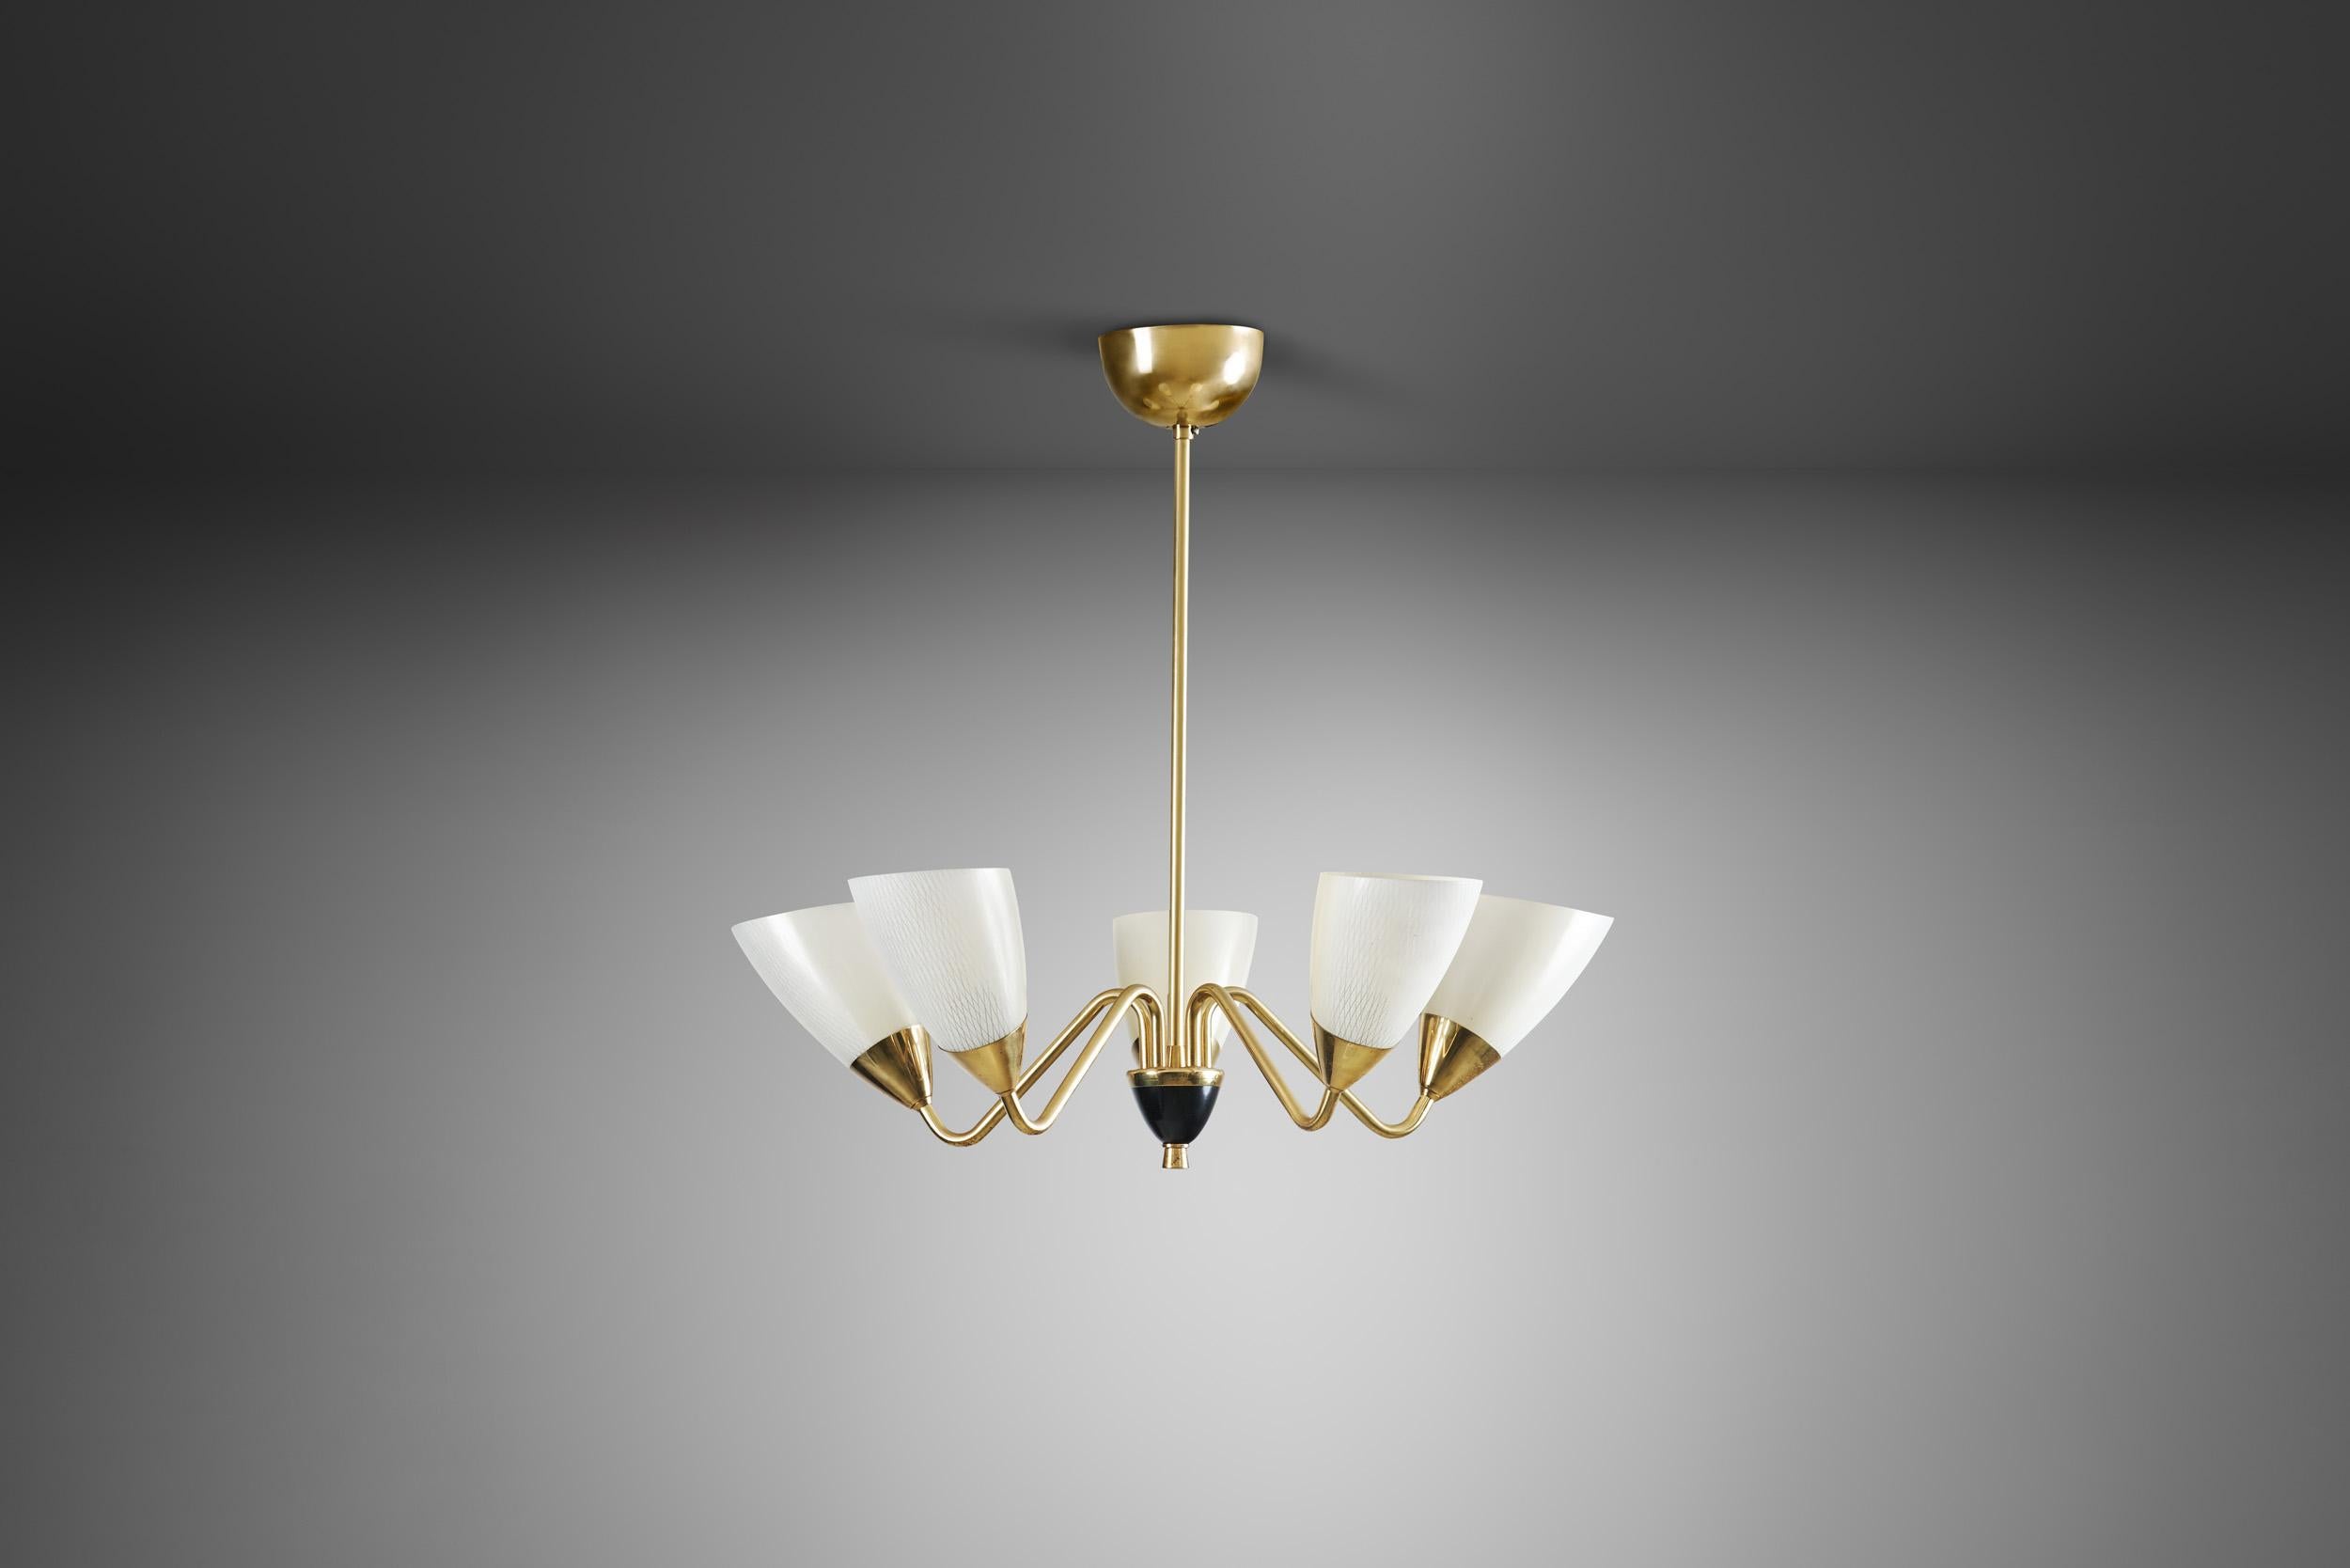 Mid-20th Century Swedish Five-Arm Brass and Glass Chandelier, Sweden, ca 1950s